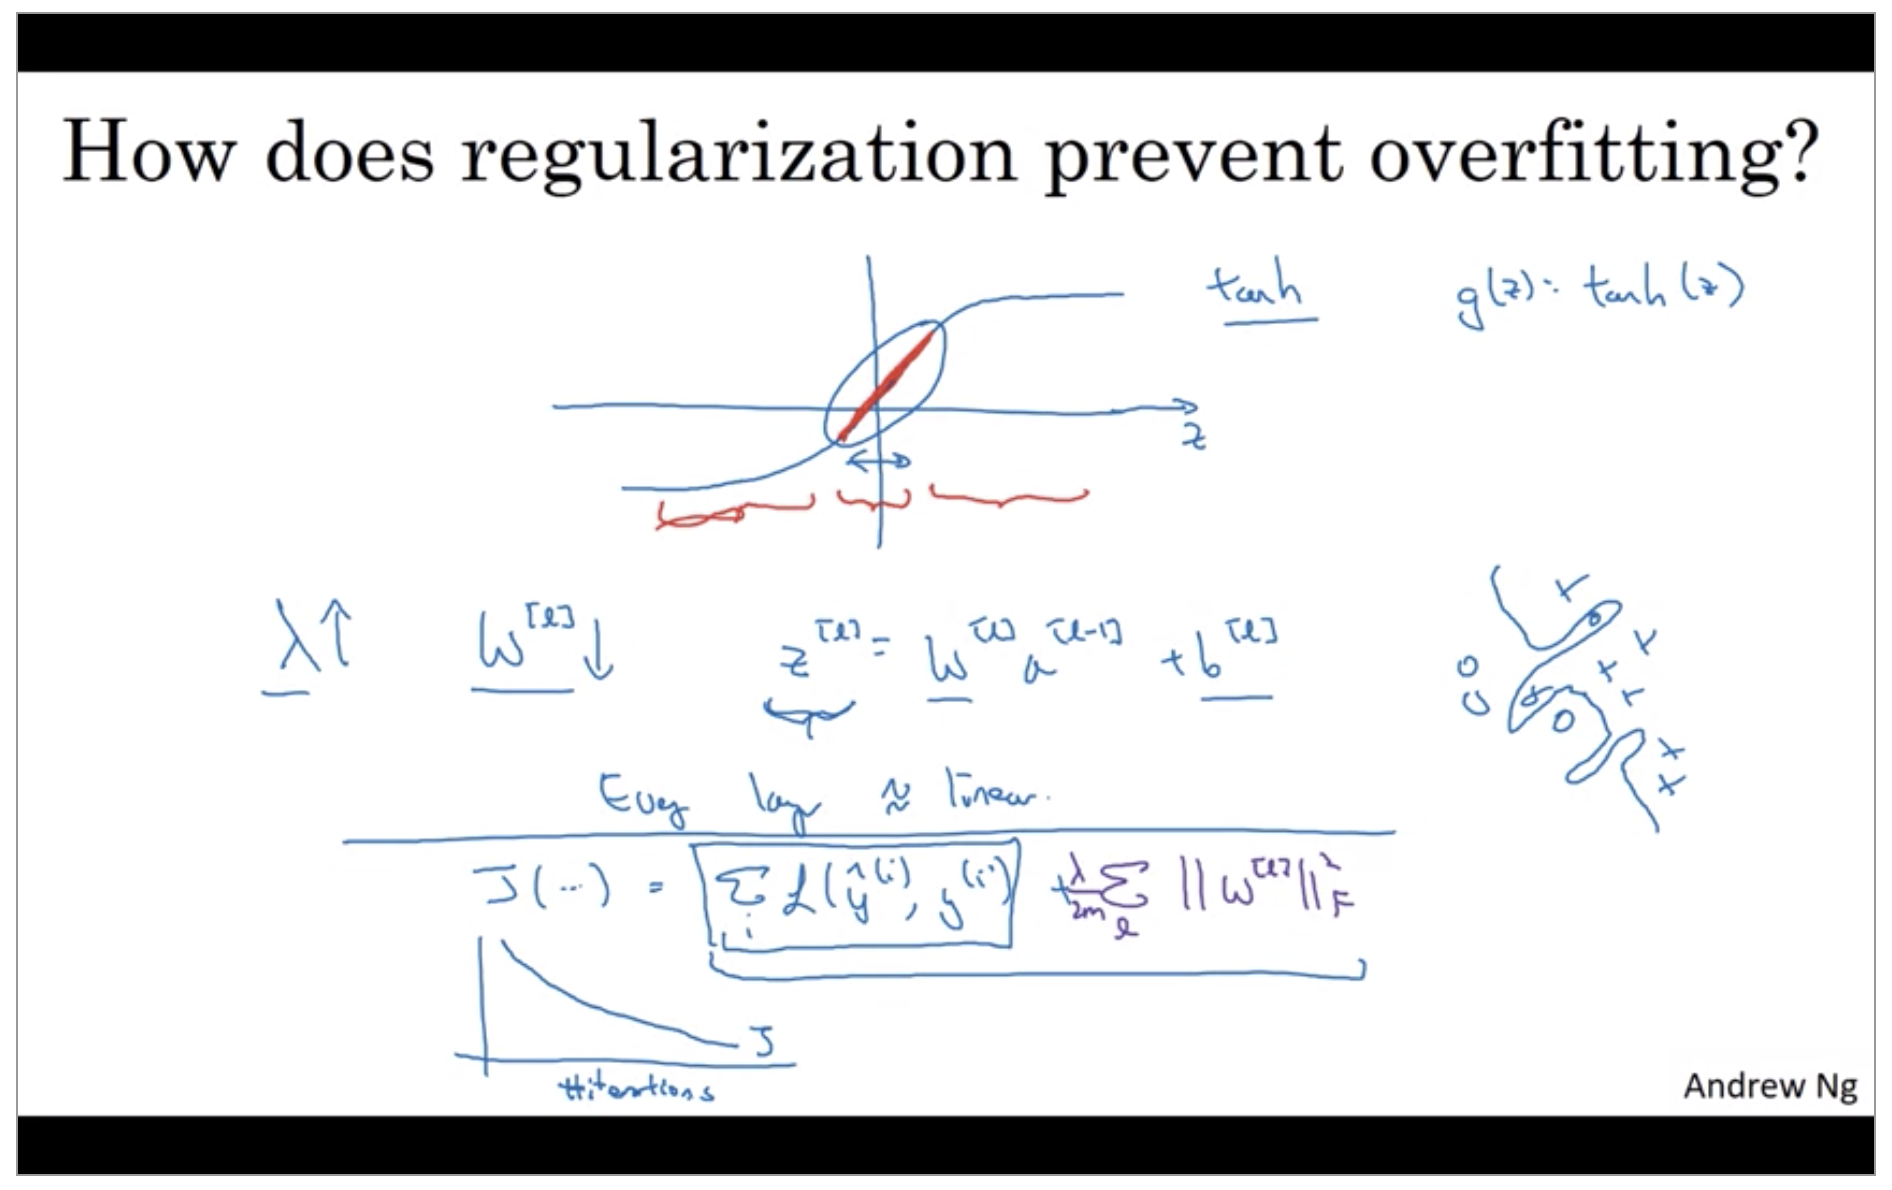 how-does-regularization-prevent-overfitting-2.png